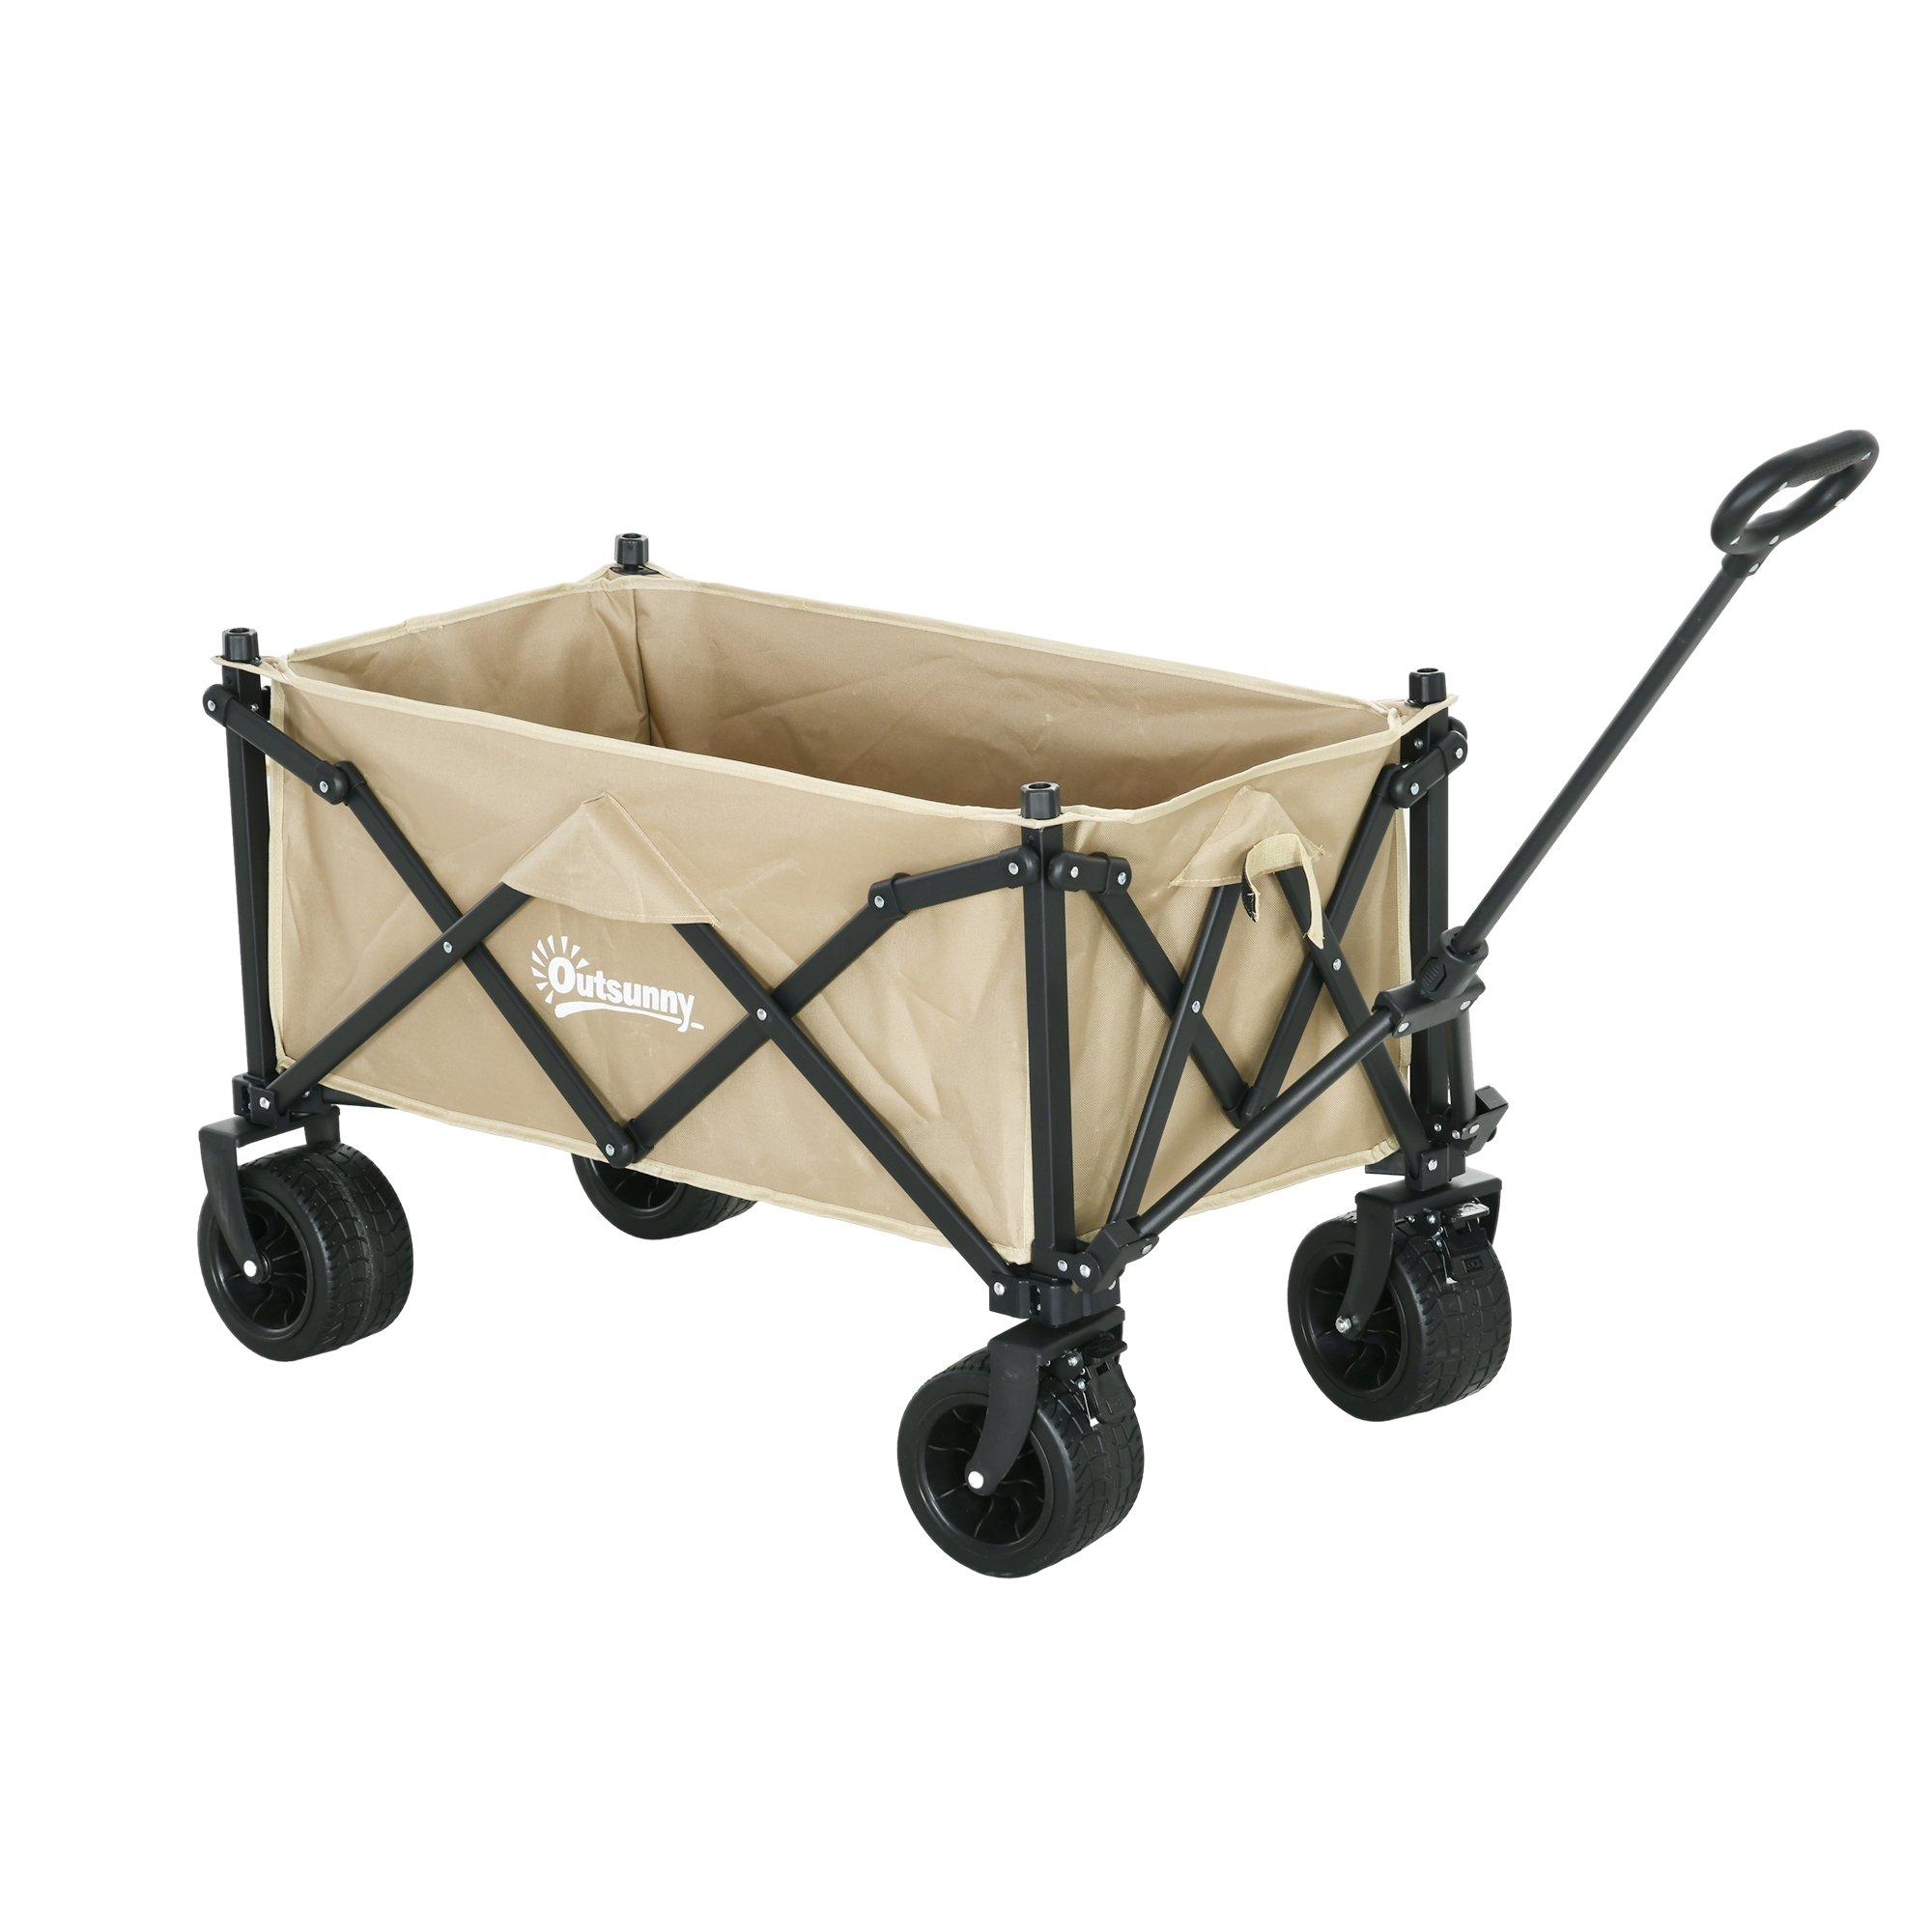 Foldable Garden Cart, Outdoor Utility Wagon with Carry Bag